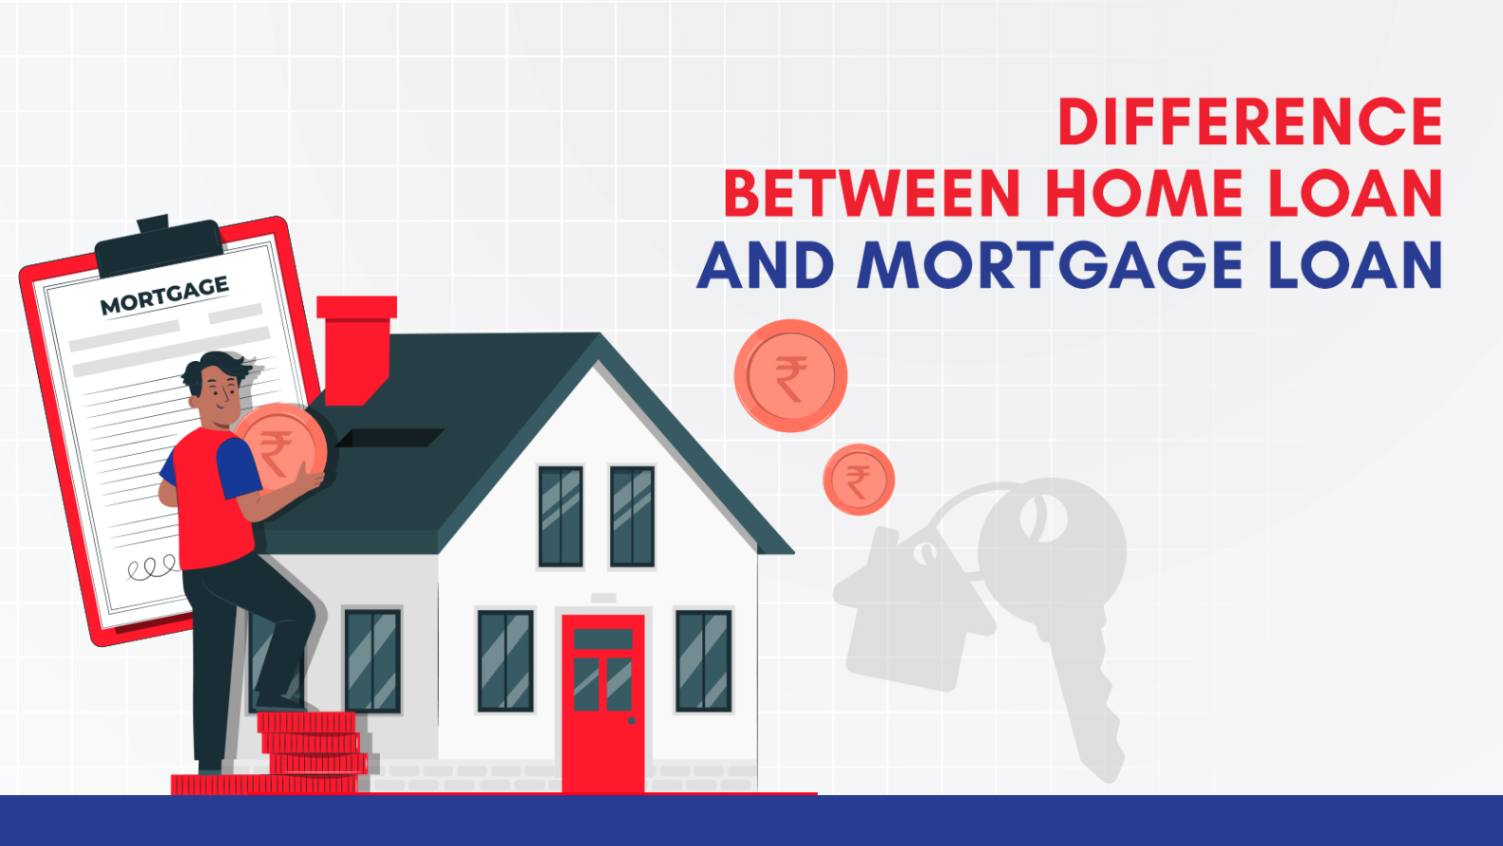 Learn the Key Difference between Home Loan and Mortgage Loan